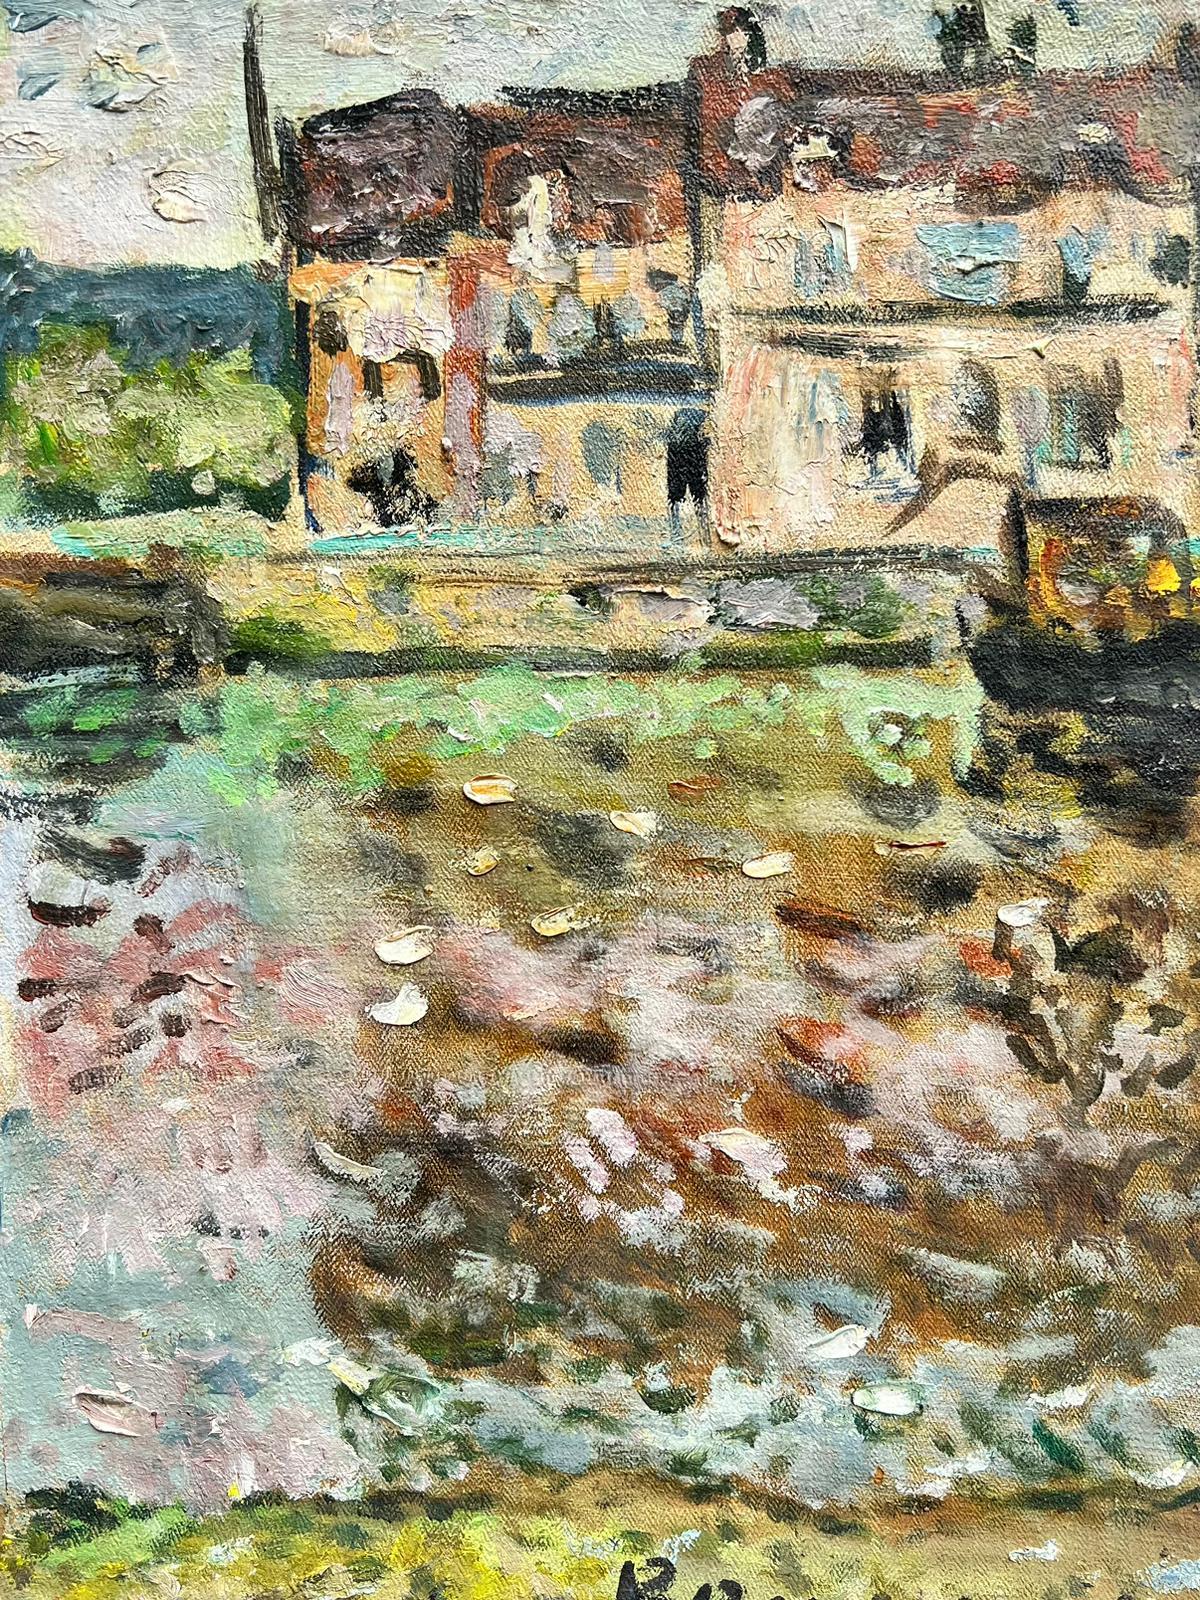 Houses by the River
by Georges Bousquet (1904-1976)
signed
inscribed verso
oil painting on canvas, unframed
canvas: 14 x 10.5 inches
provenance: private collection, Brittany, France
condition: very good and sound condition 
